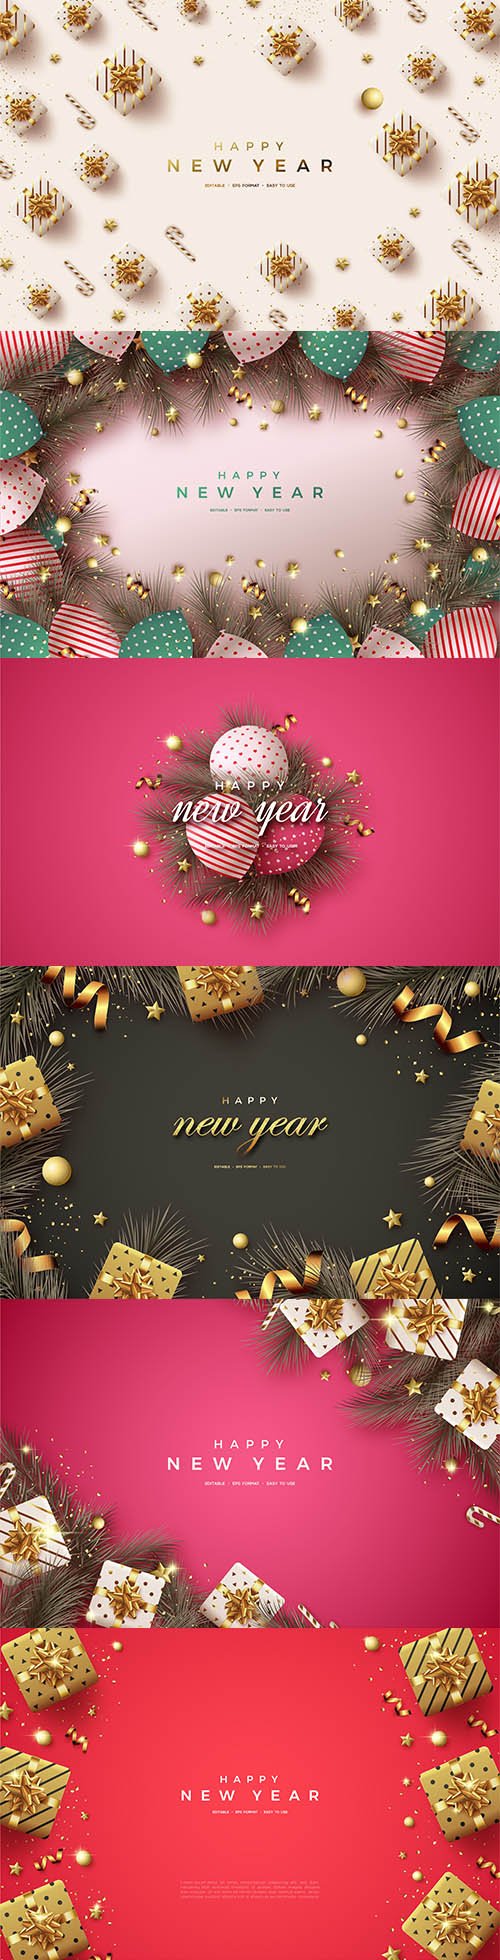 Happy new year card with decorations